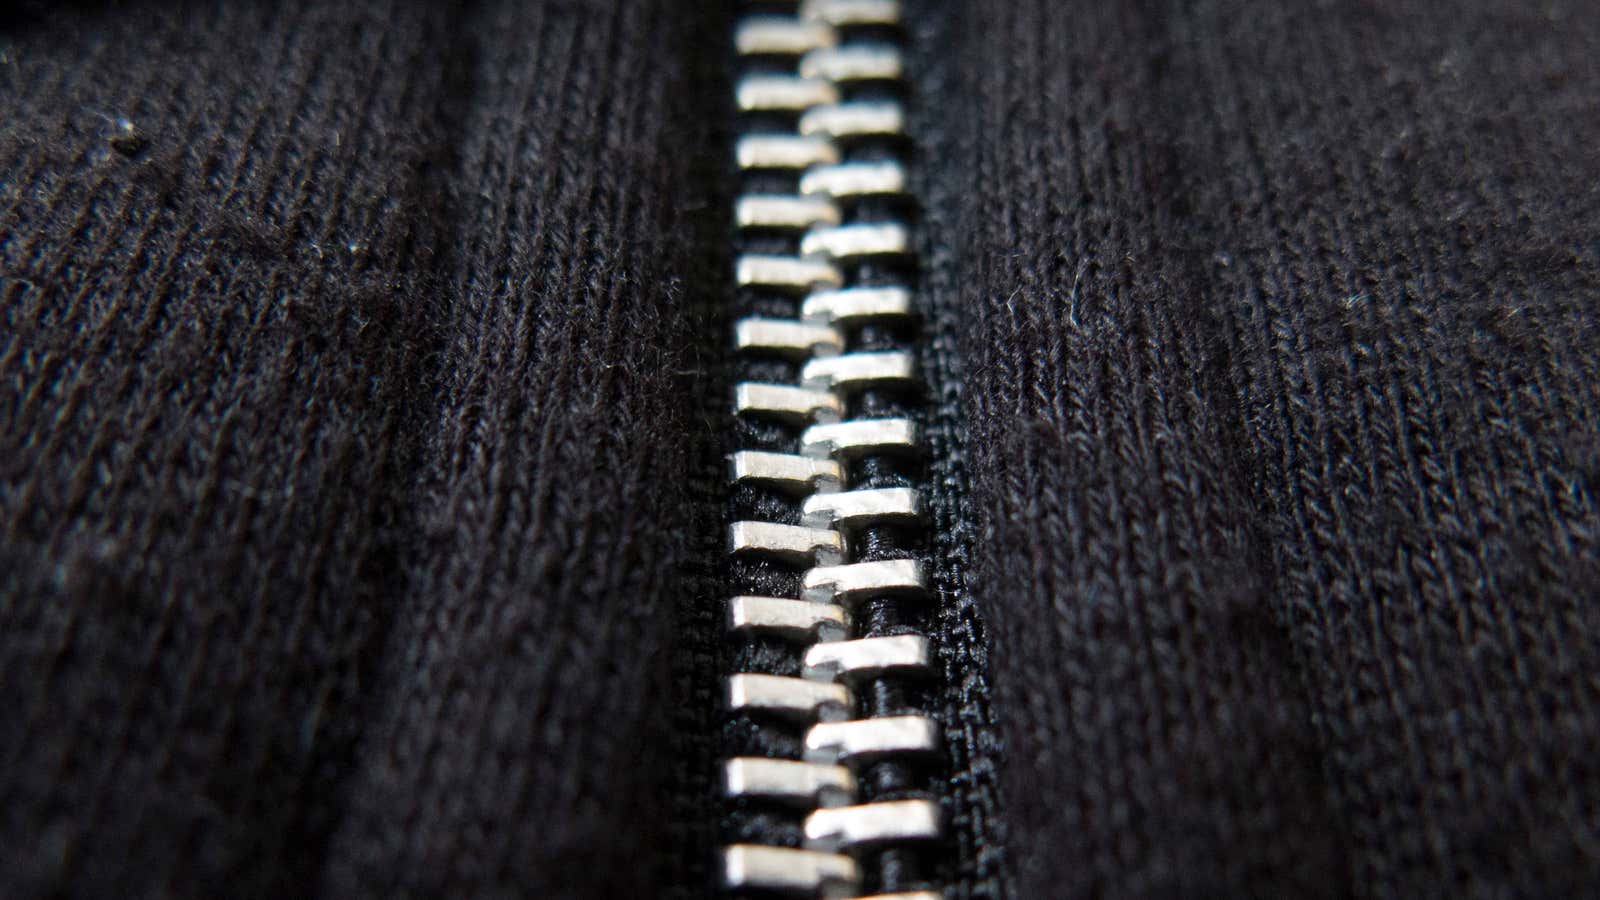 The zipper's history shows how even great ideas can fail at first